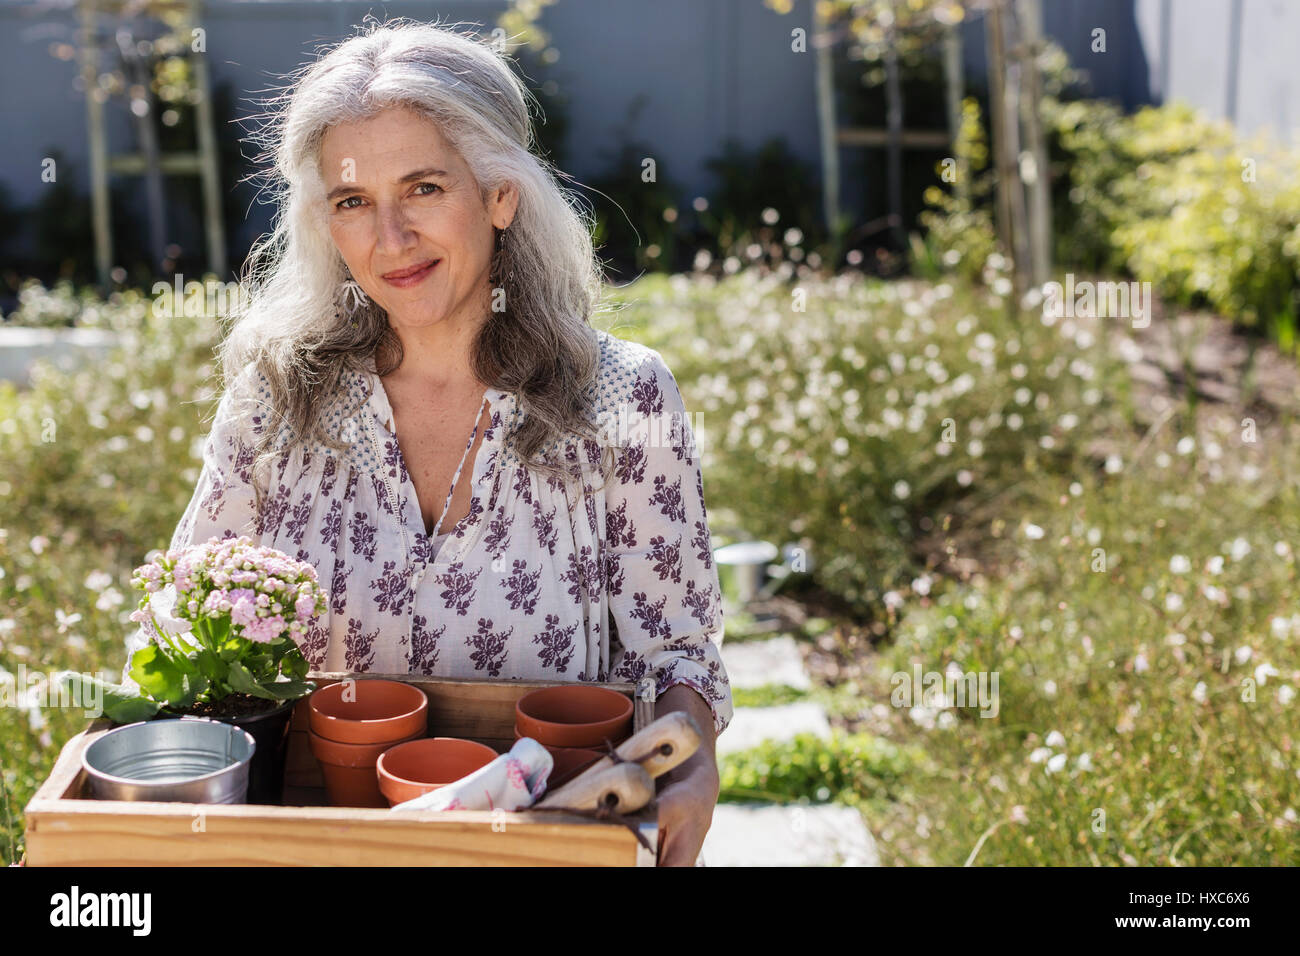 Portrait mature woman carrying gardening tray in sunny garden Stock Photo